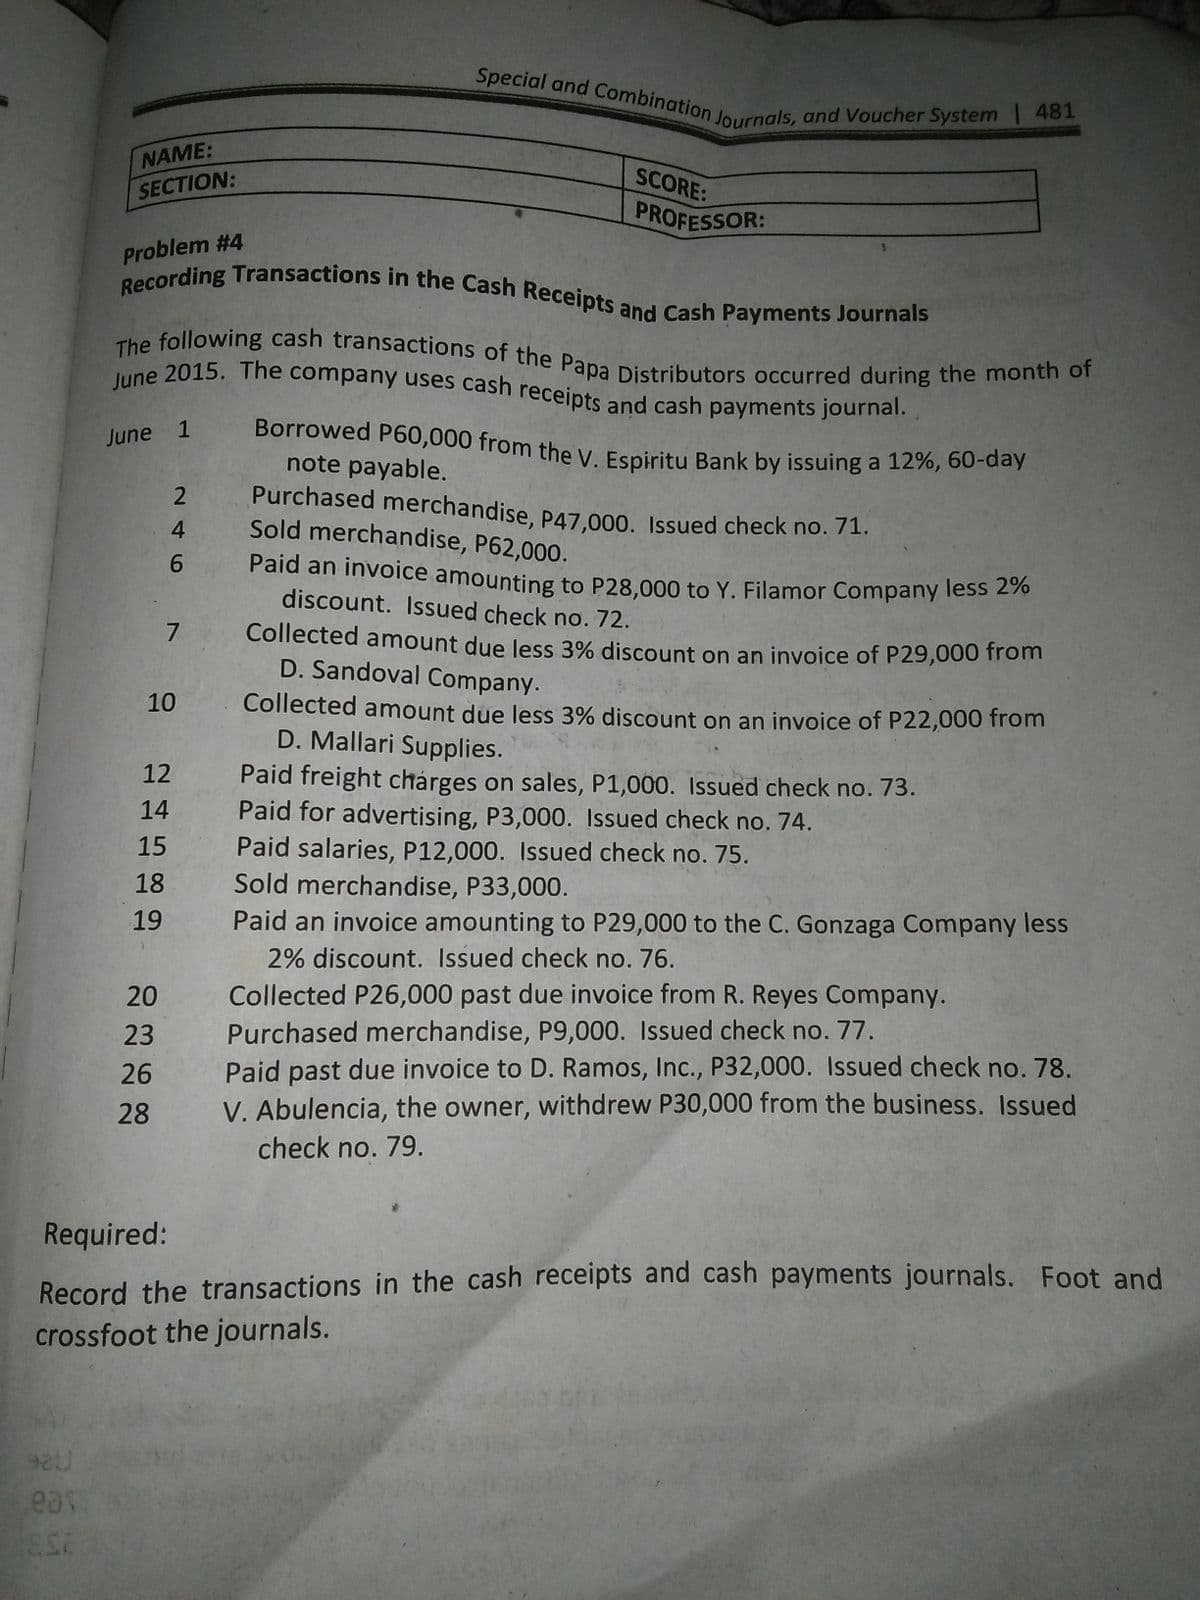 Recording Transactions in the Cash Receipts and Cash Payments Journals
Special and Combination Journals, and Voucher System 481
June 2015. The company uses cash receipts and cash payments journal.
Borrowed P60,000 from the V. Espiritu Bank by issuing a 12%, 60-day
The following cash transactions of the Papa Distributors occurred during the month of
NAME:
SCORE:
SECTION:
PROFESSOR:
Problem #4
Borrowed P60,000 from the y Espiritu Bank by issuing a 12%, 60-day
note payable.
Purchased merchandise, P47.000. Issued check no. 71.
Sold merchandise, P62,000.
June 1
9.
Paid an invoice amounting to P28.000 to Y. Filamor Company less 270
discount. Issued check no. 72.
7
Collected amount due less 3% discount on an invoice of P29,000 from
D. Sandoval Company.
10
Collected amount due less 3% discount on an invoice of P22,000 from
D. Mallari Supplies.
Paid freight chárges on sales, P1,000. Issued check no. 73.
Paid for advertising, P3,000. Issued check no. 74.
Paid salaries, P12,000. Issued check no. 75.
Sold merchandise, P33,000.
12
14
15
18
Paid an invoice amounting to P29,000 to the C. Gonzaga Company less
2% discount. Issued check no. 76.
19
Collected P26,000 past due invoice from R. Reyes Company.
Purchased merchandise, P9,000. Issued check no. 77.
Paid past due invoice to D. Ramos, Inc., P32,000. Issued check no. 78.
V. Abulencia, the owner, withdrew P30,000 from the business. Issued
20
23
26
28
check no. 79.
Required:
Record the transactions in the cash receipts and cash payments journals. Foot and
crossfoot the journals.
eas
246
